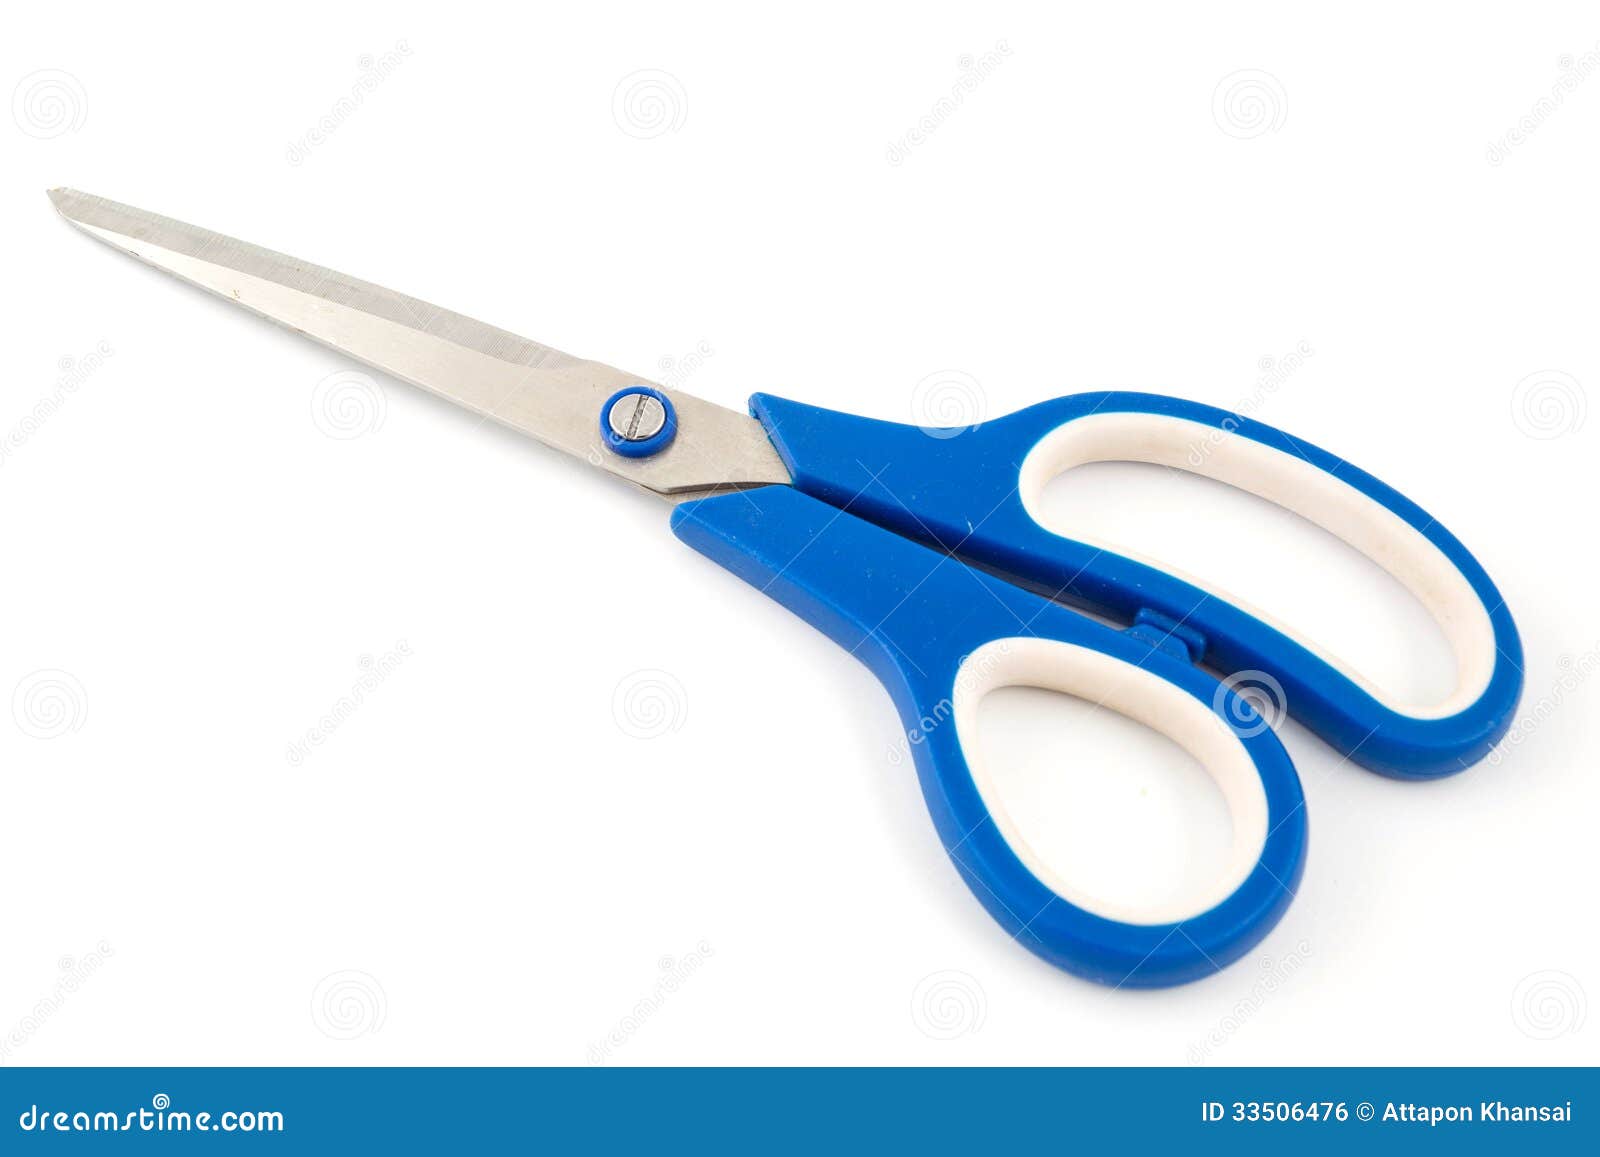 https://thumbs.dreamstime.com/z/blue-scissors-handled-cutting-out-33506476.jpg